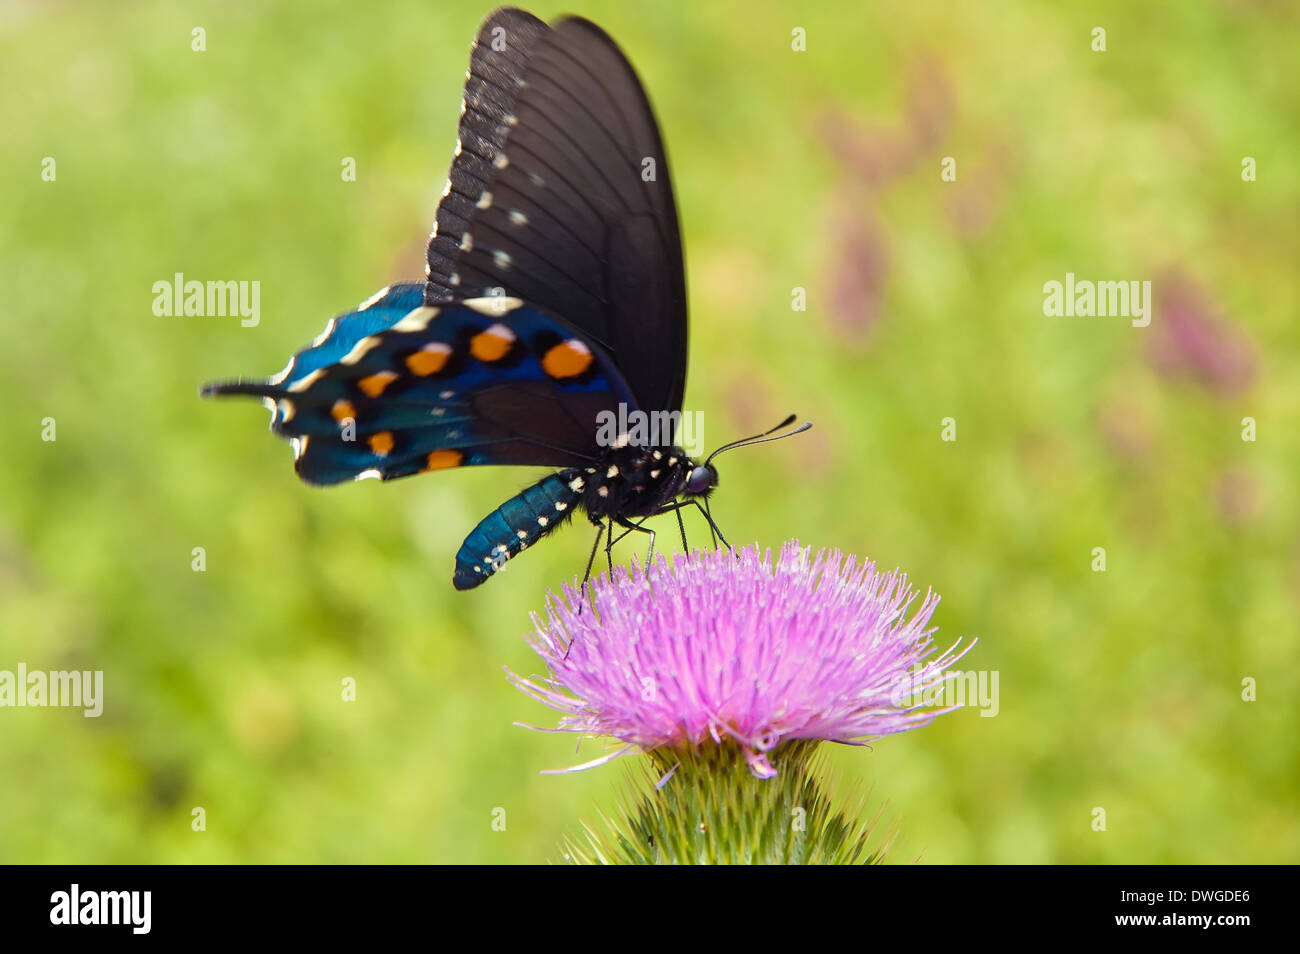 Pipevine Swallowtail Butterfly Banque D'Images